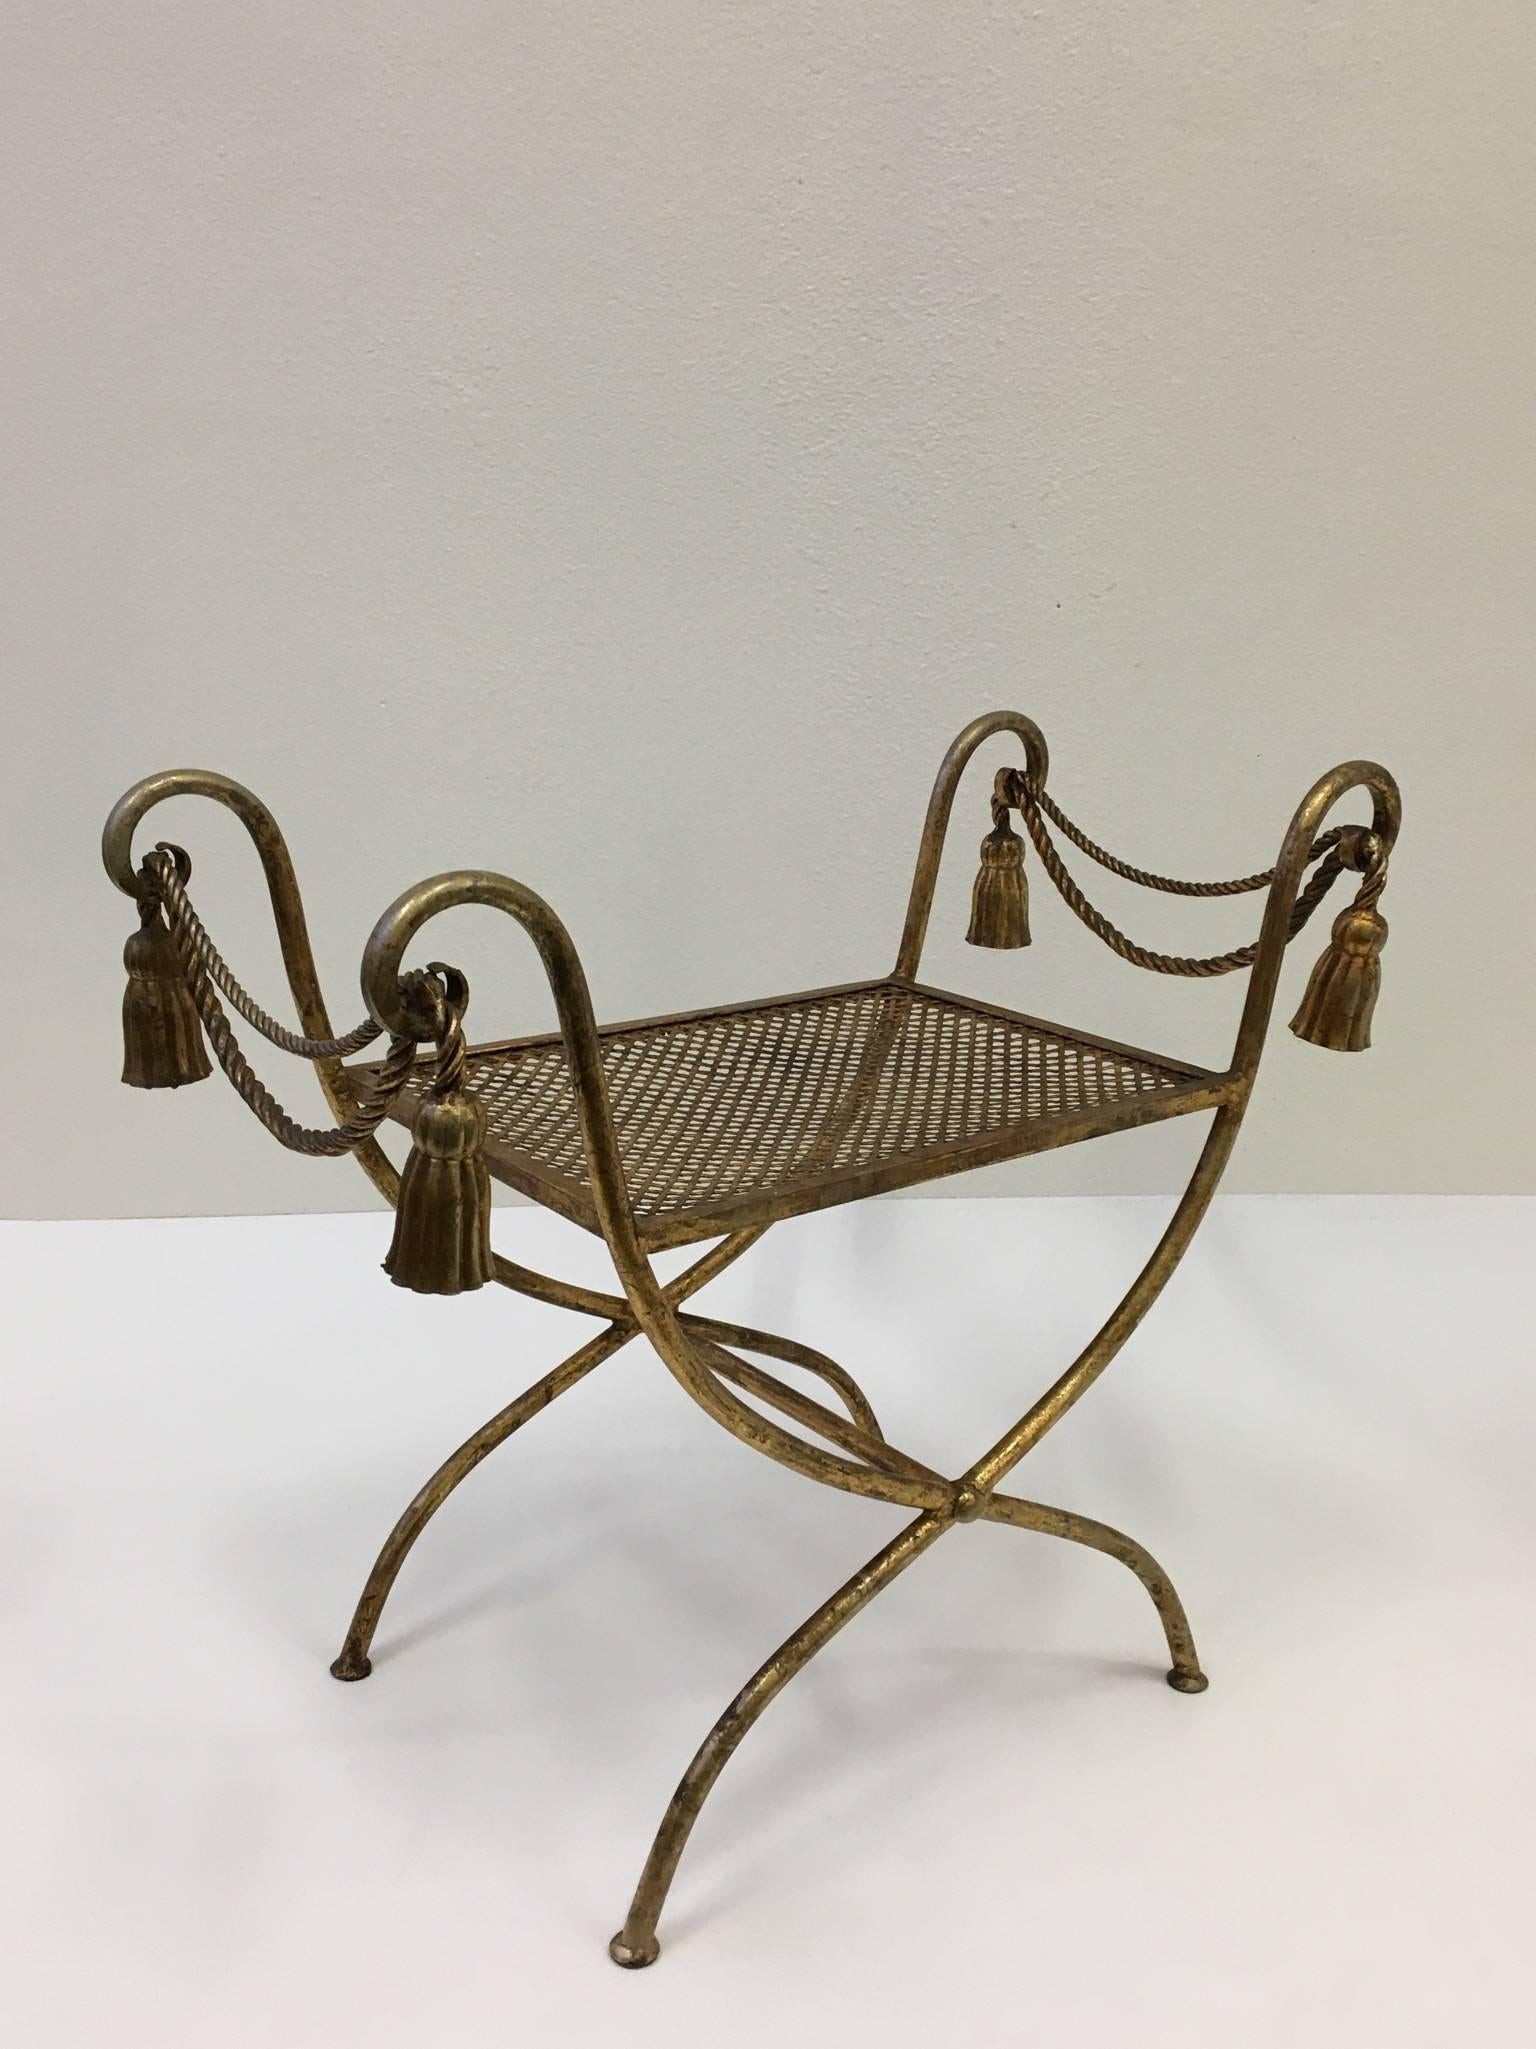 A beautiful Italian gilded iron vanity stool or bench from the 1960s.
The bench is marked Italy on the side (see detail photos).
Dimension: 29.26 inches, wide 16 inches deep, 24.25 inches high.